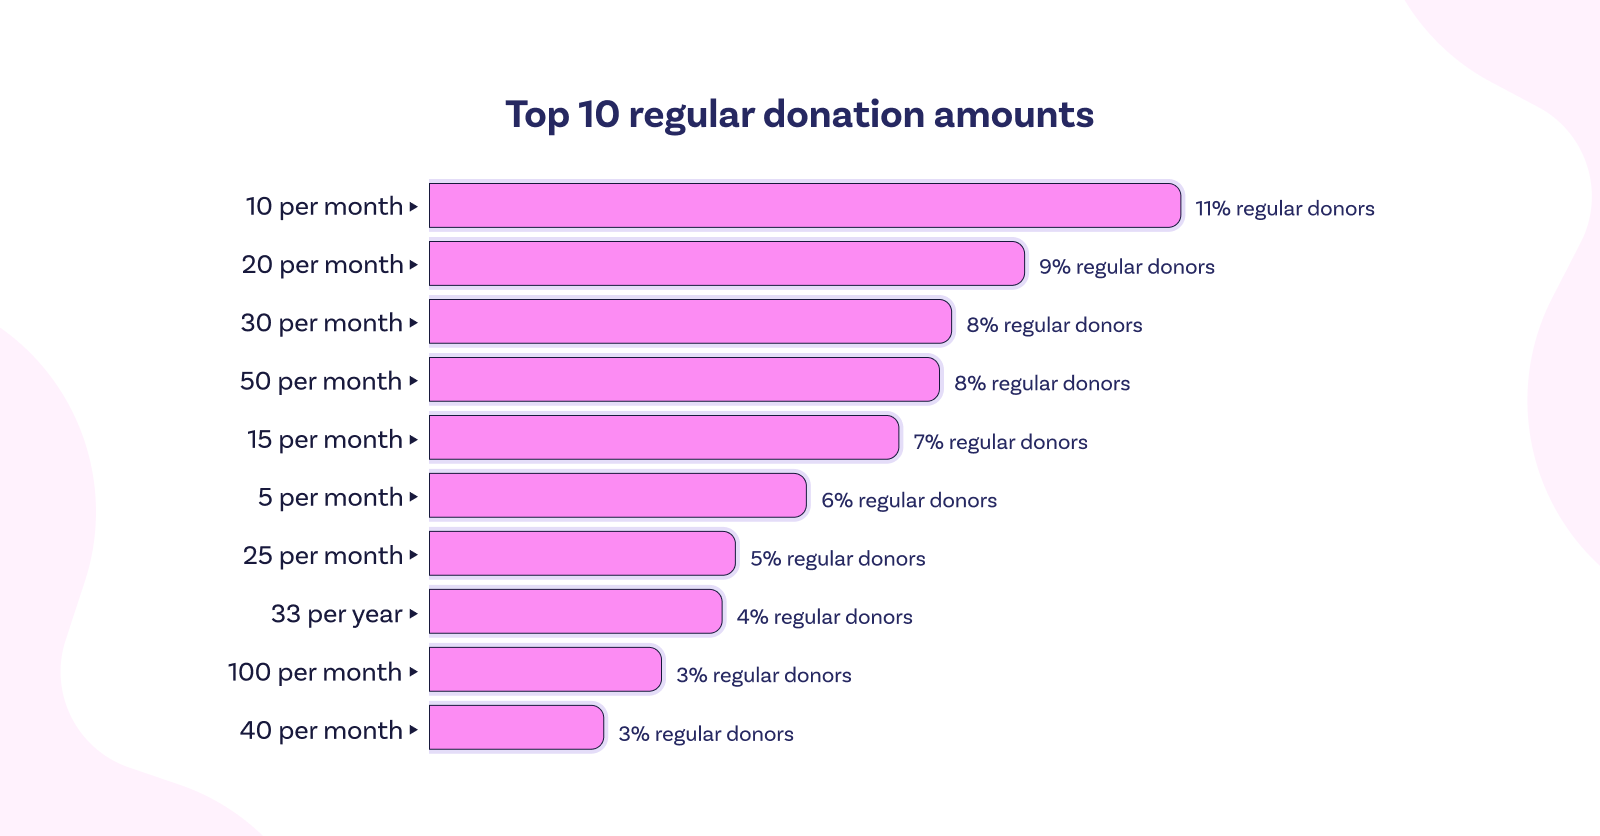 Chart showing the top 10 regular donation amounts.